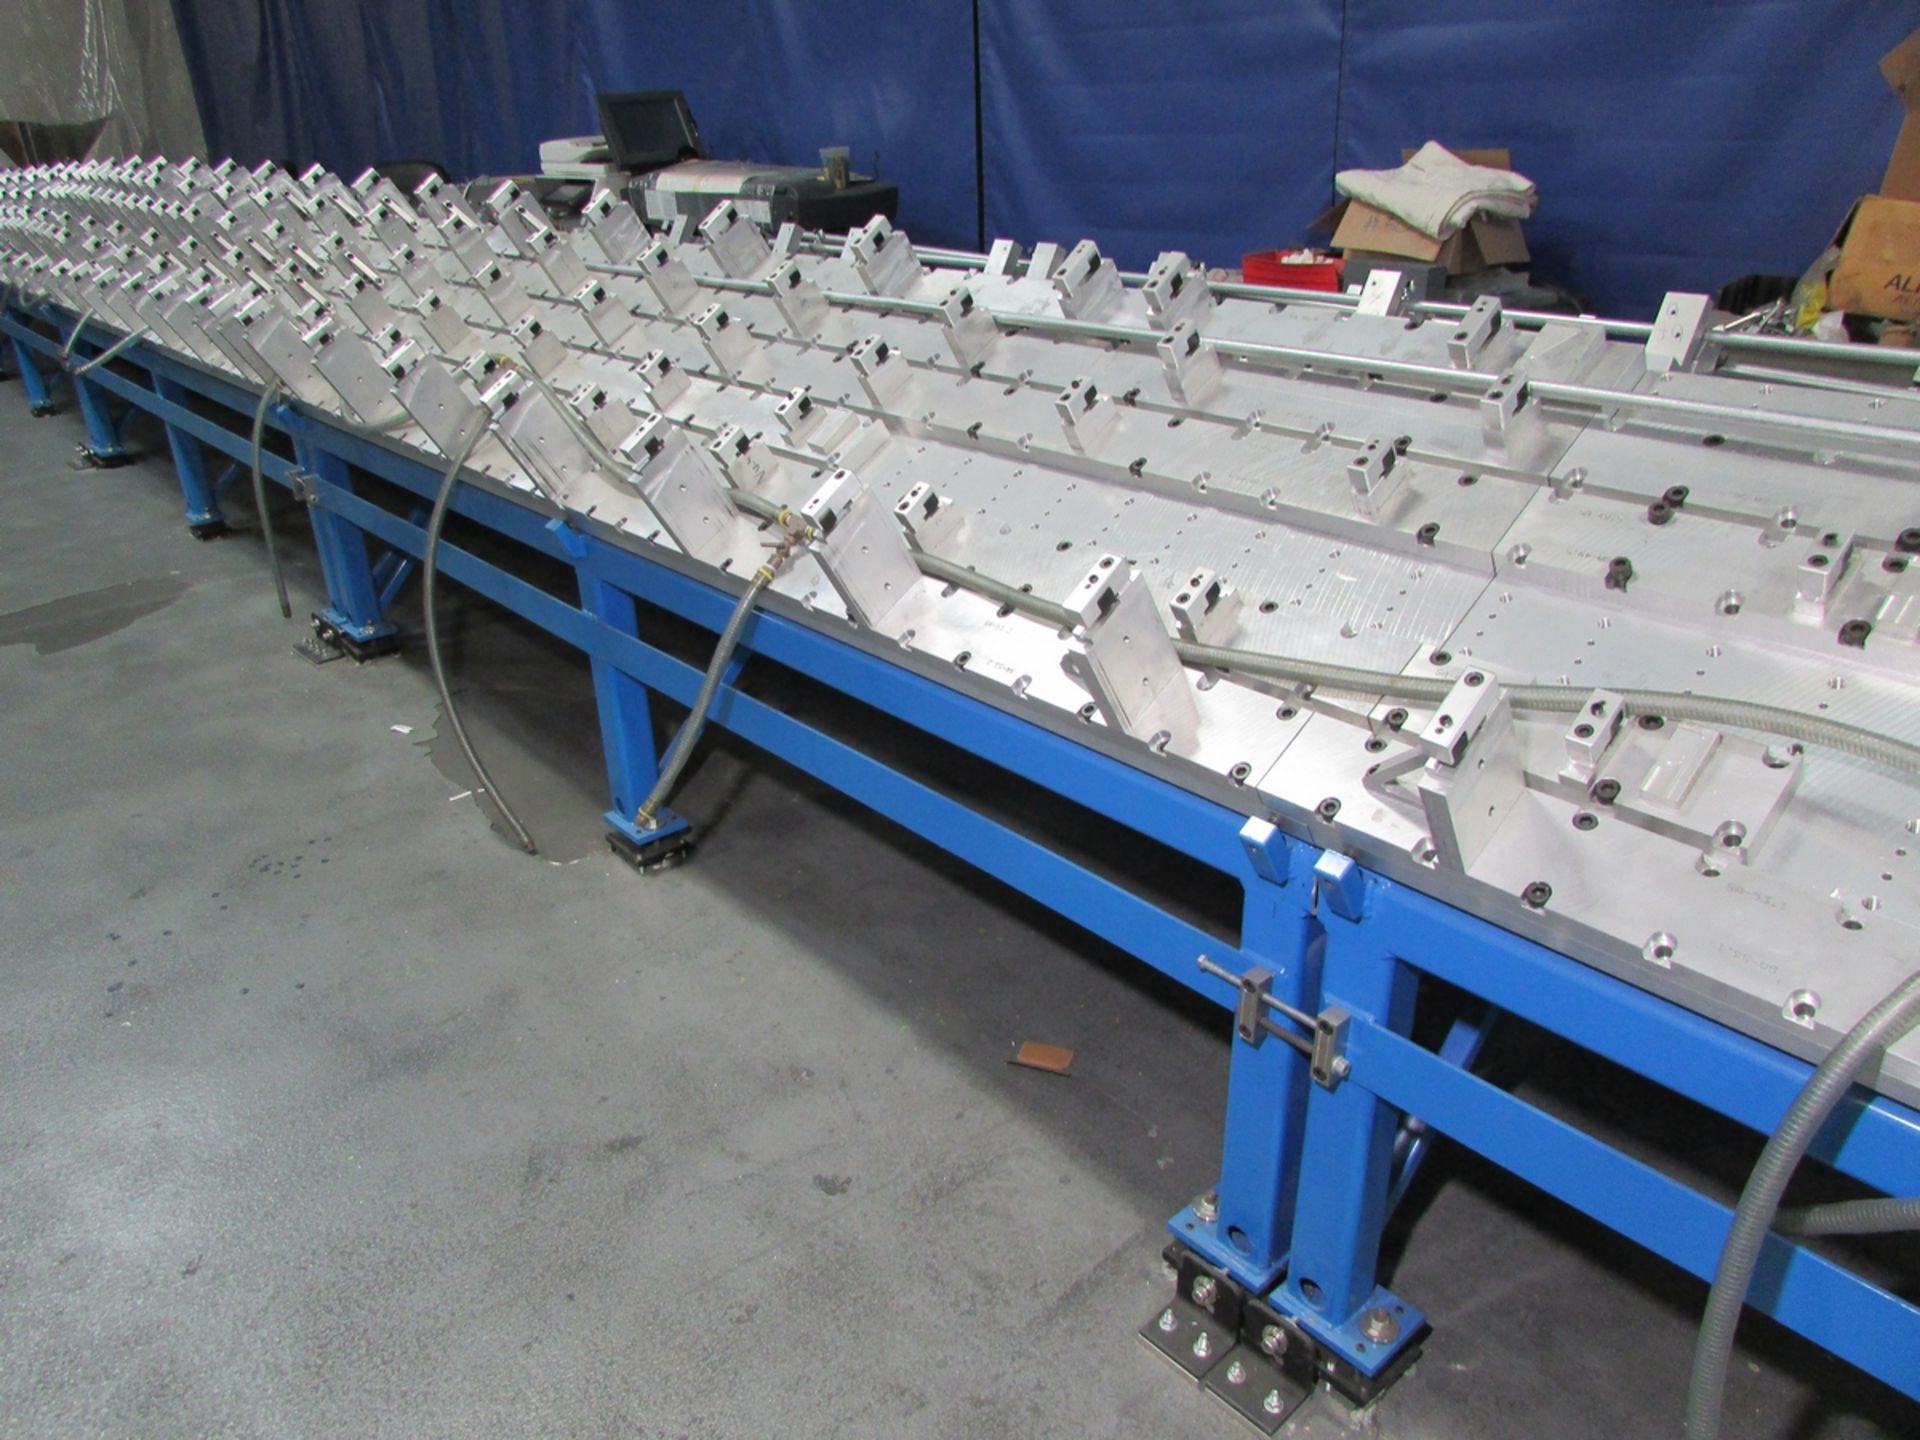 LOT - (5) 120" X 48" DRILLED, TAPPED AND LEVELED ALUMINUM TOP 30 DEGREE FIXTURE LAYOUT RACKS, W/ - Image 2 of 9